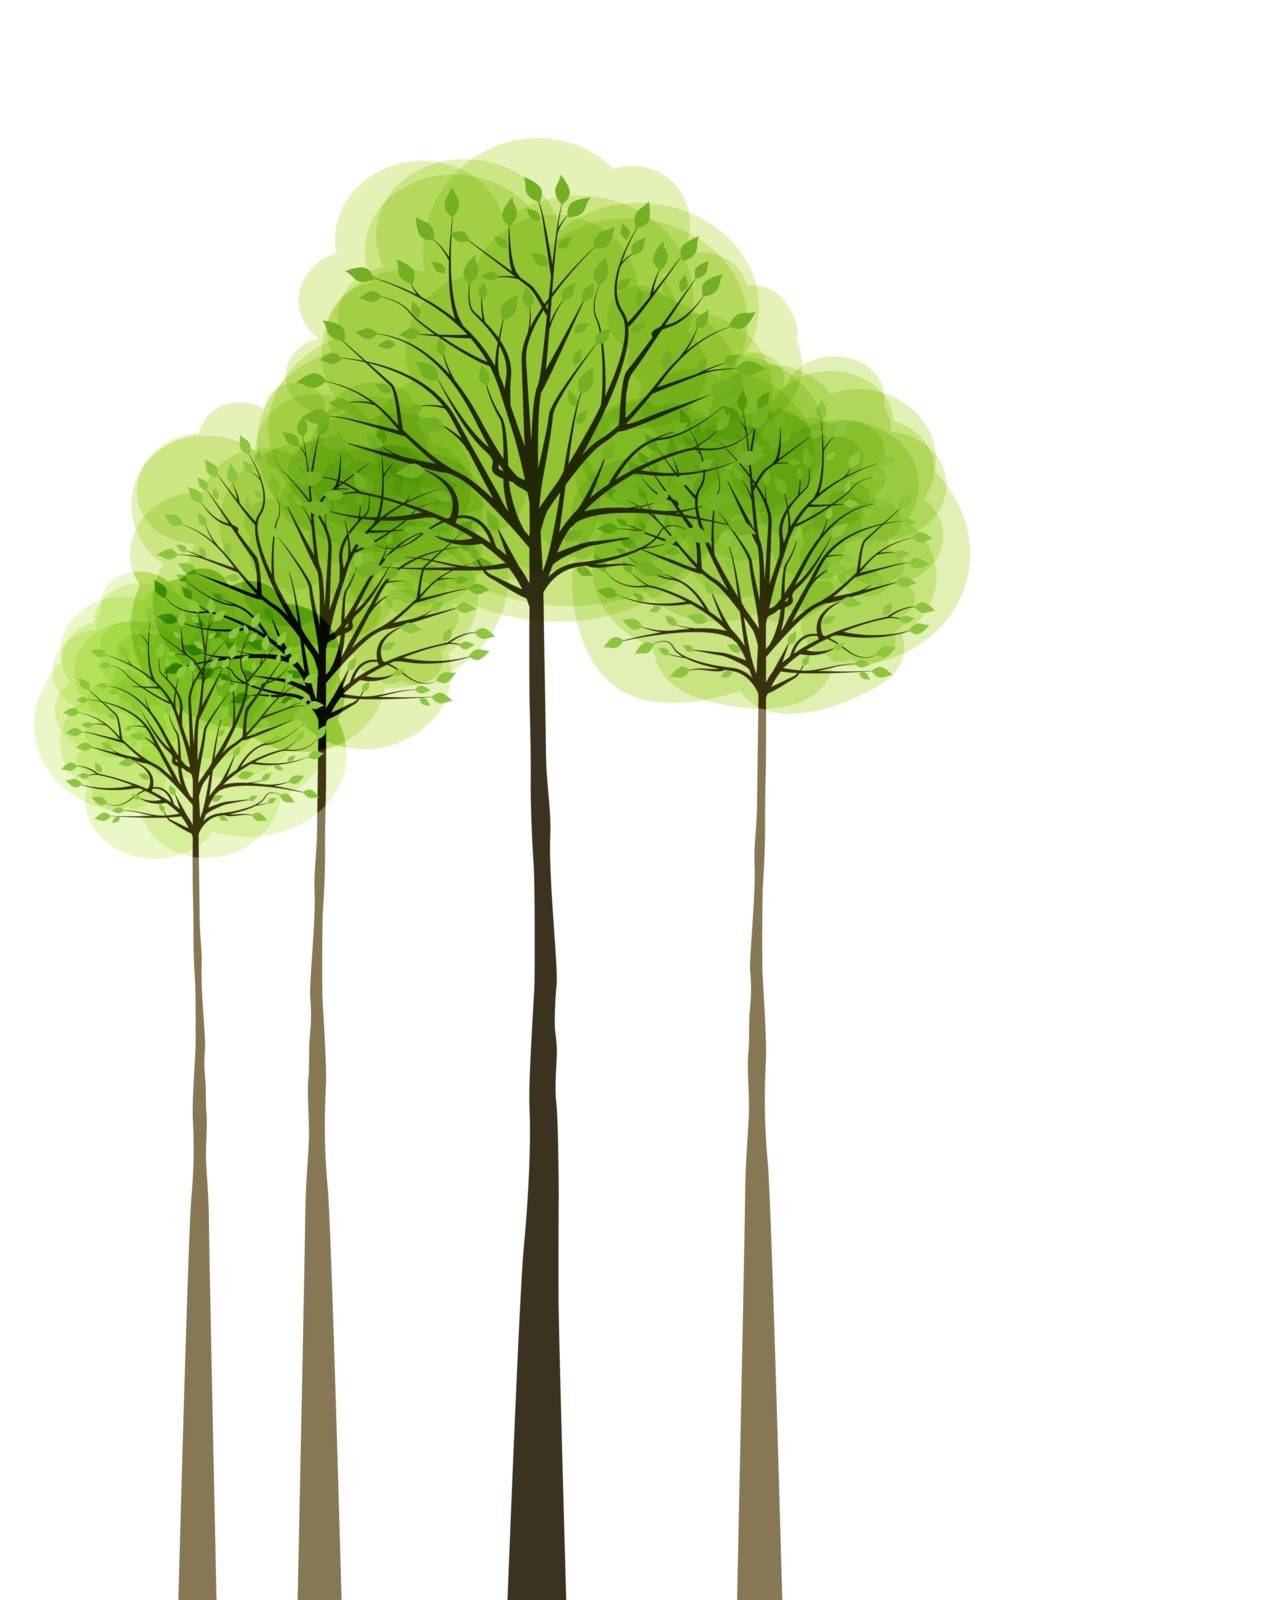 Trees with leaves on white background